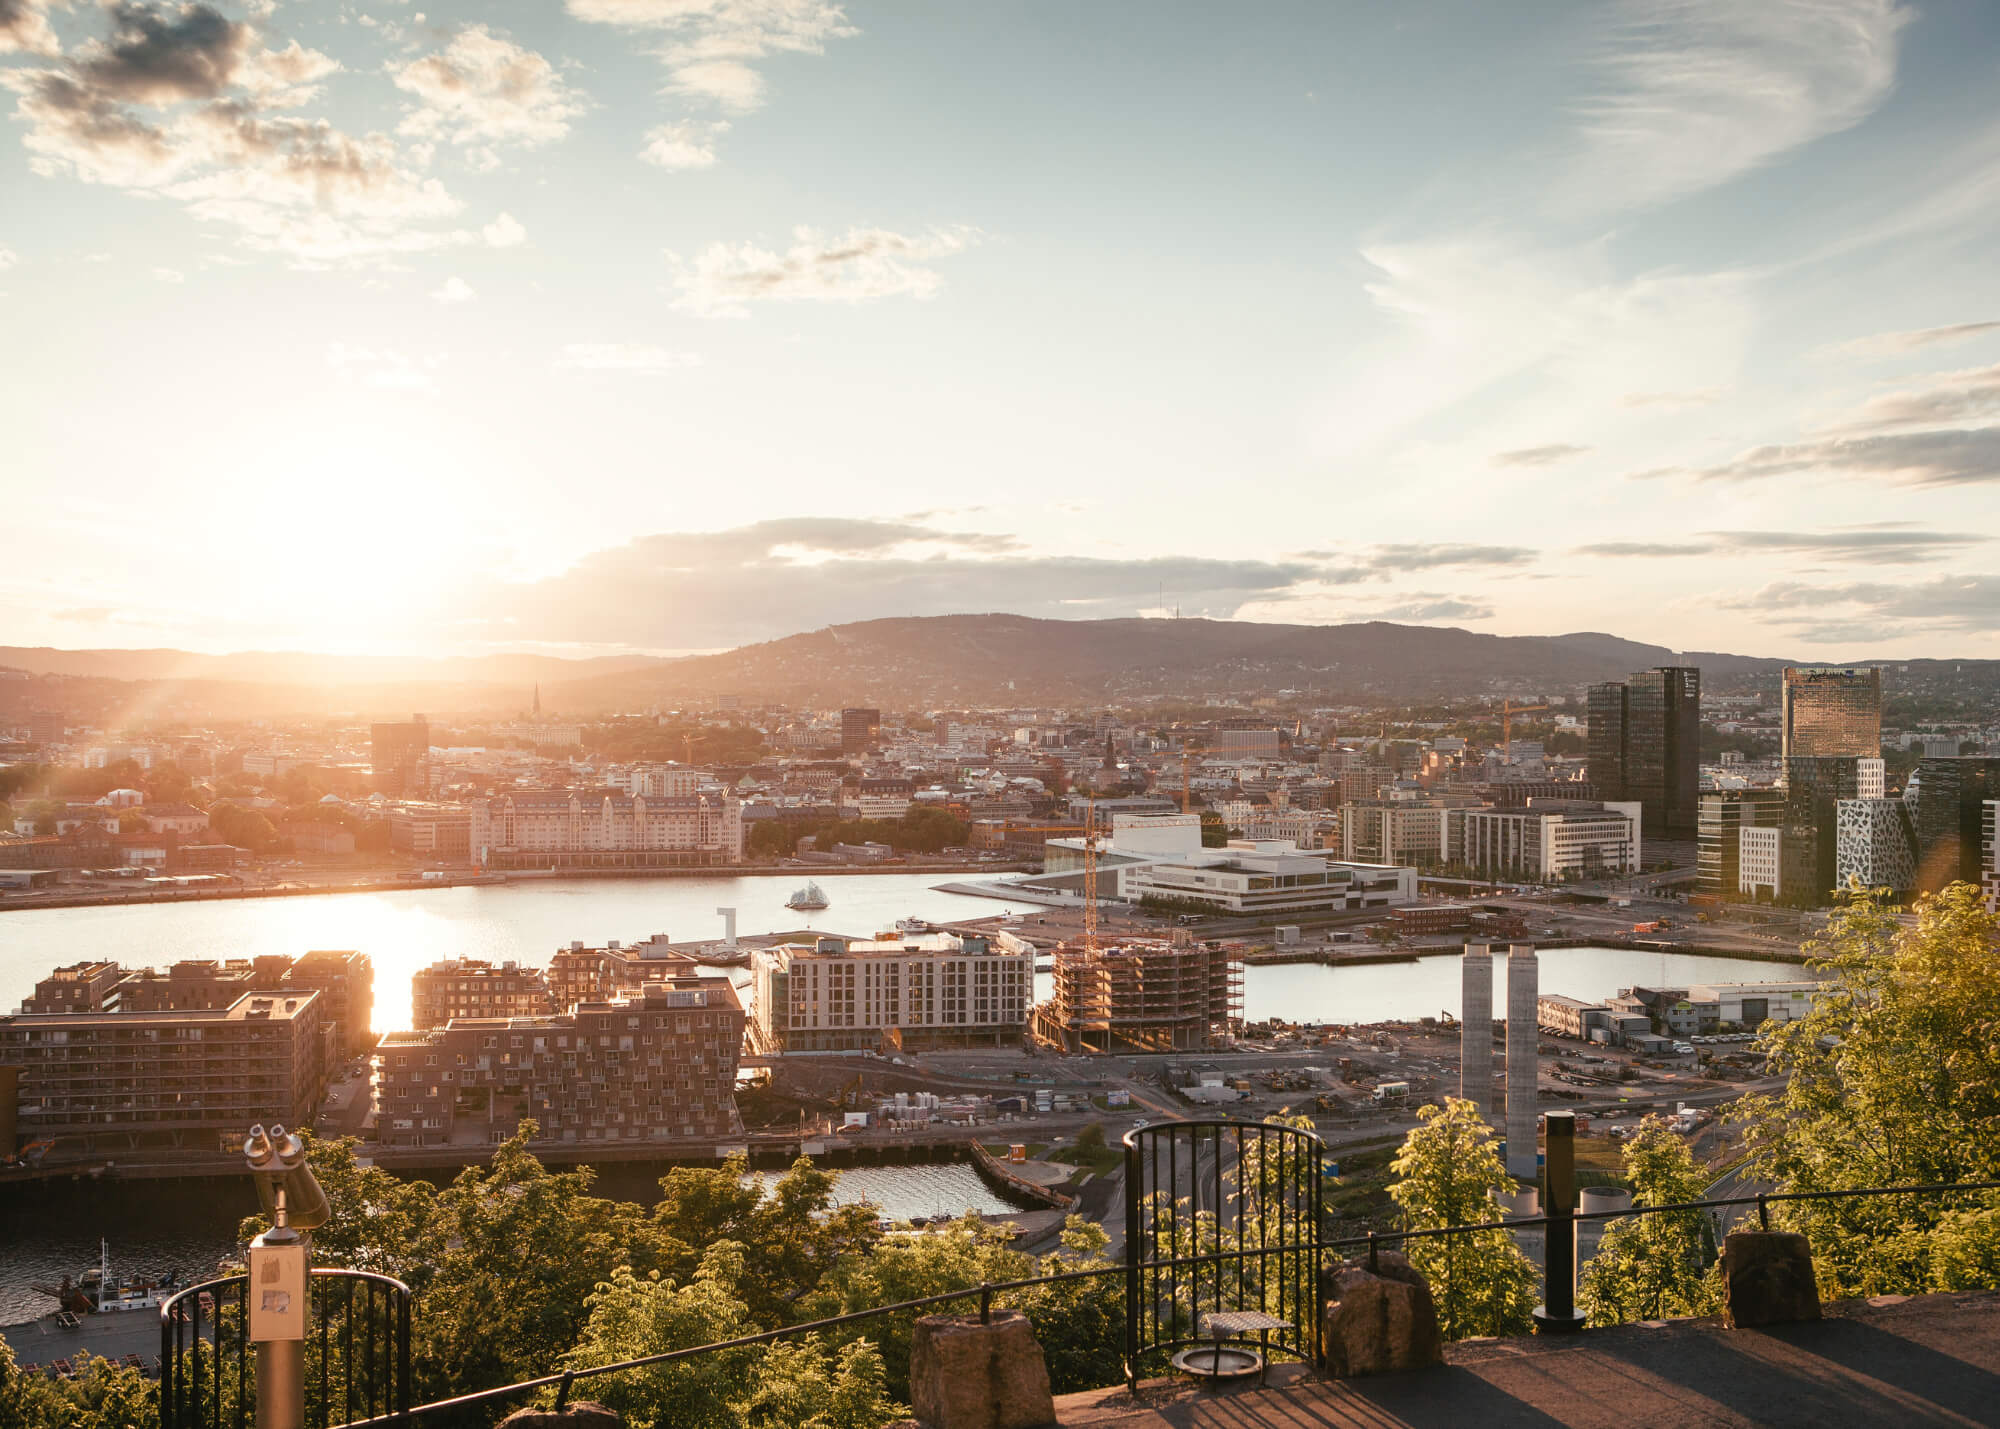 Skyline view at dusk over Oslo, Norway